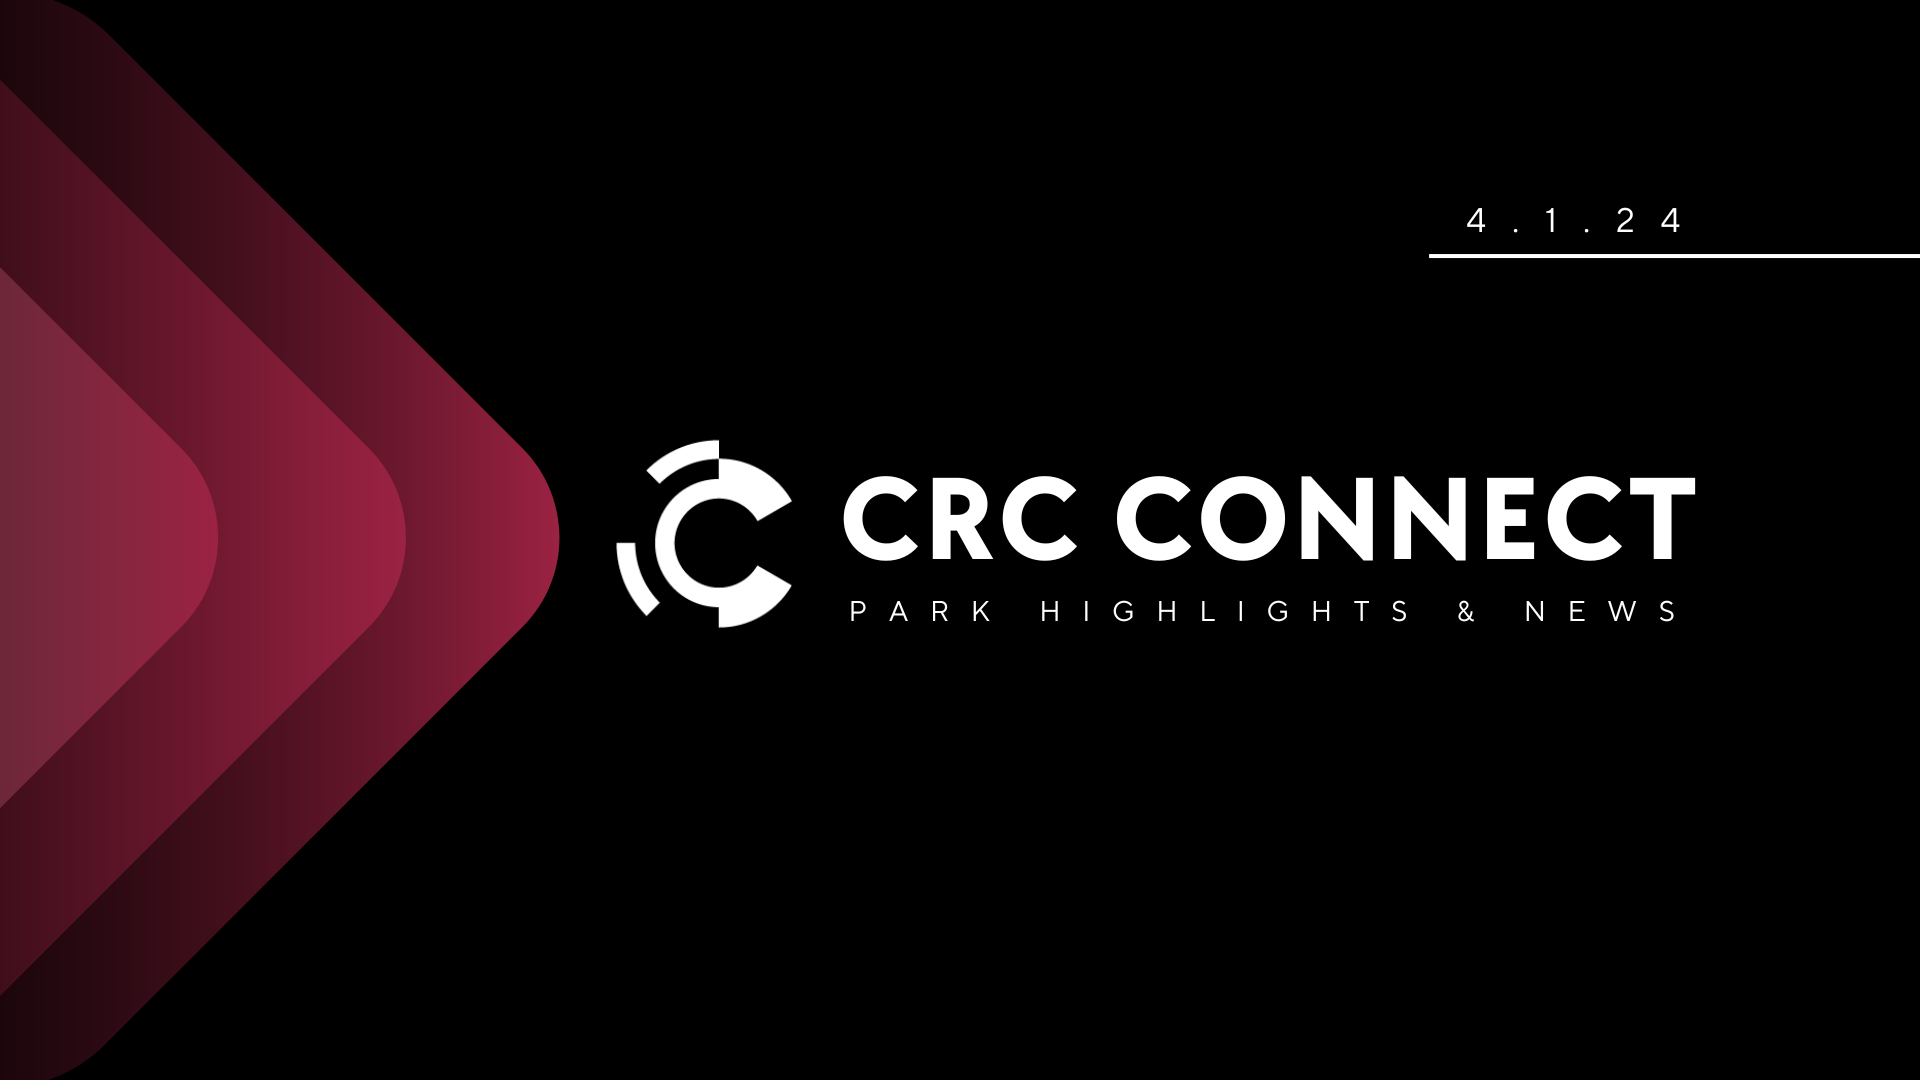 CRC Connect 4.1.24: Game Changing Technology, Entrepreneurship, and Opportunity at VTCRC!